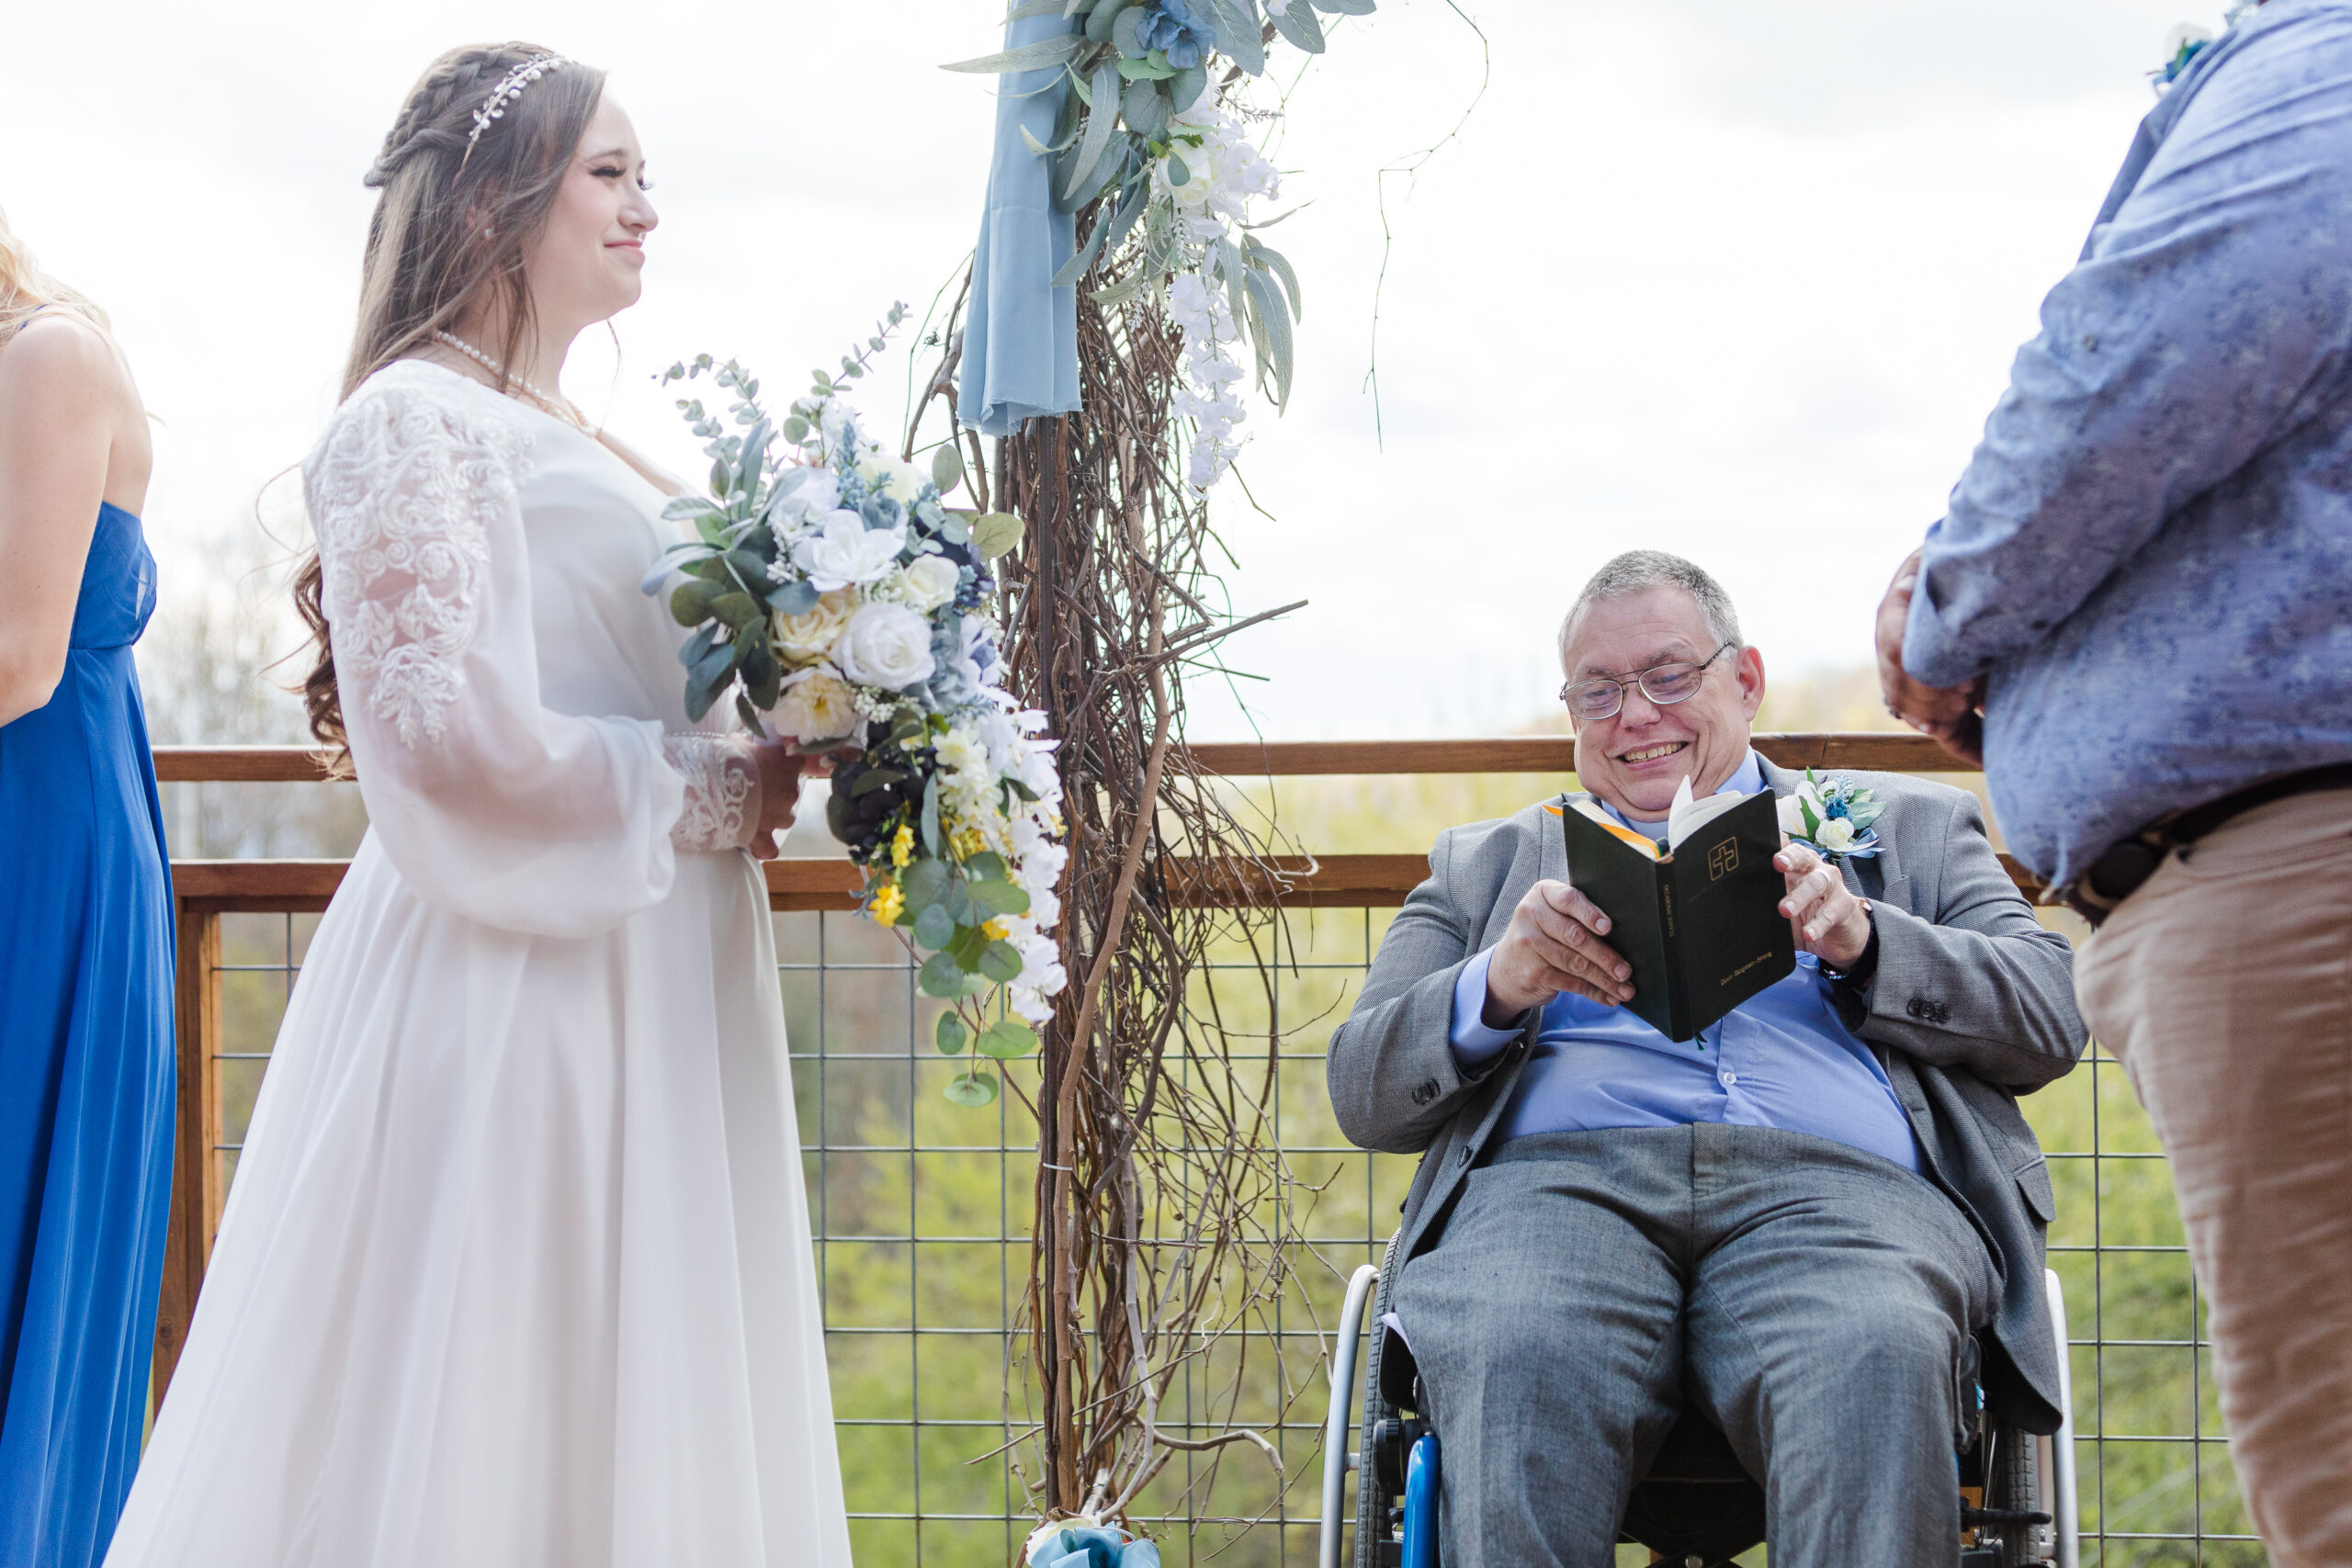 How to Make Your Wedding Accessible for Guests with Mobility Limitations